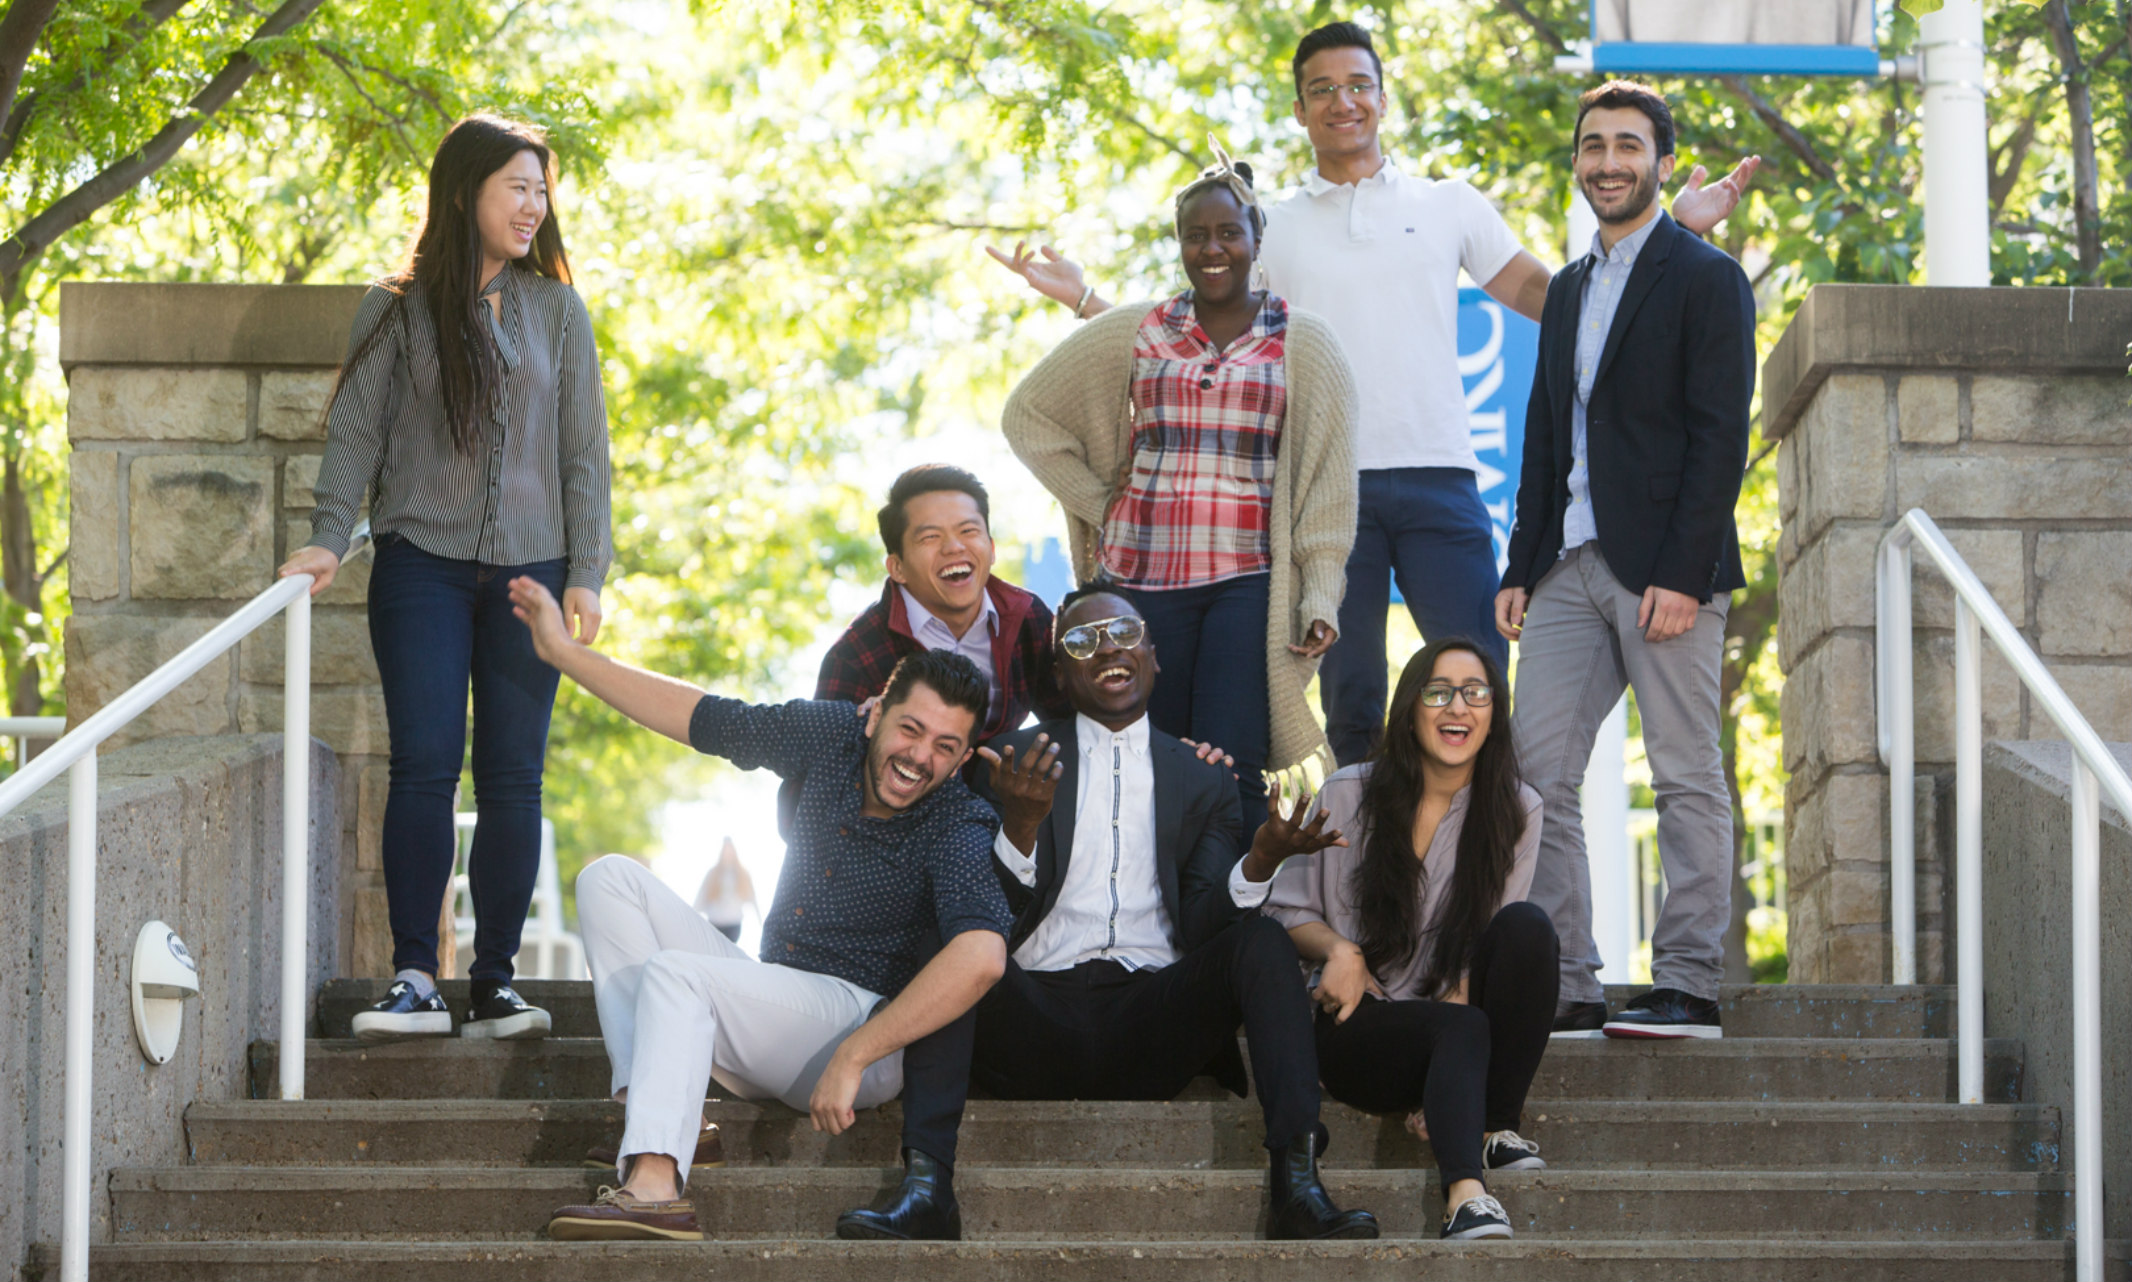 A group of international students from different countries sit on steps on the UMKC campus.